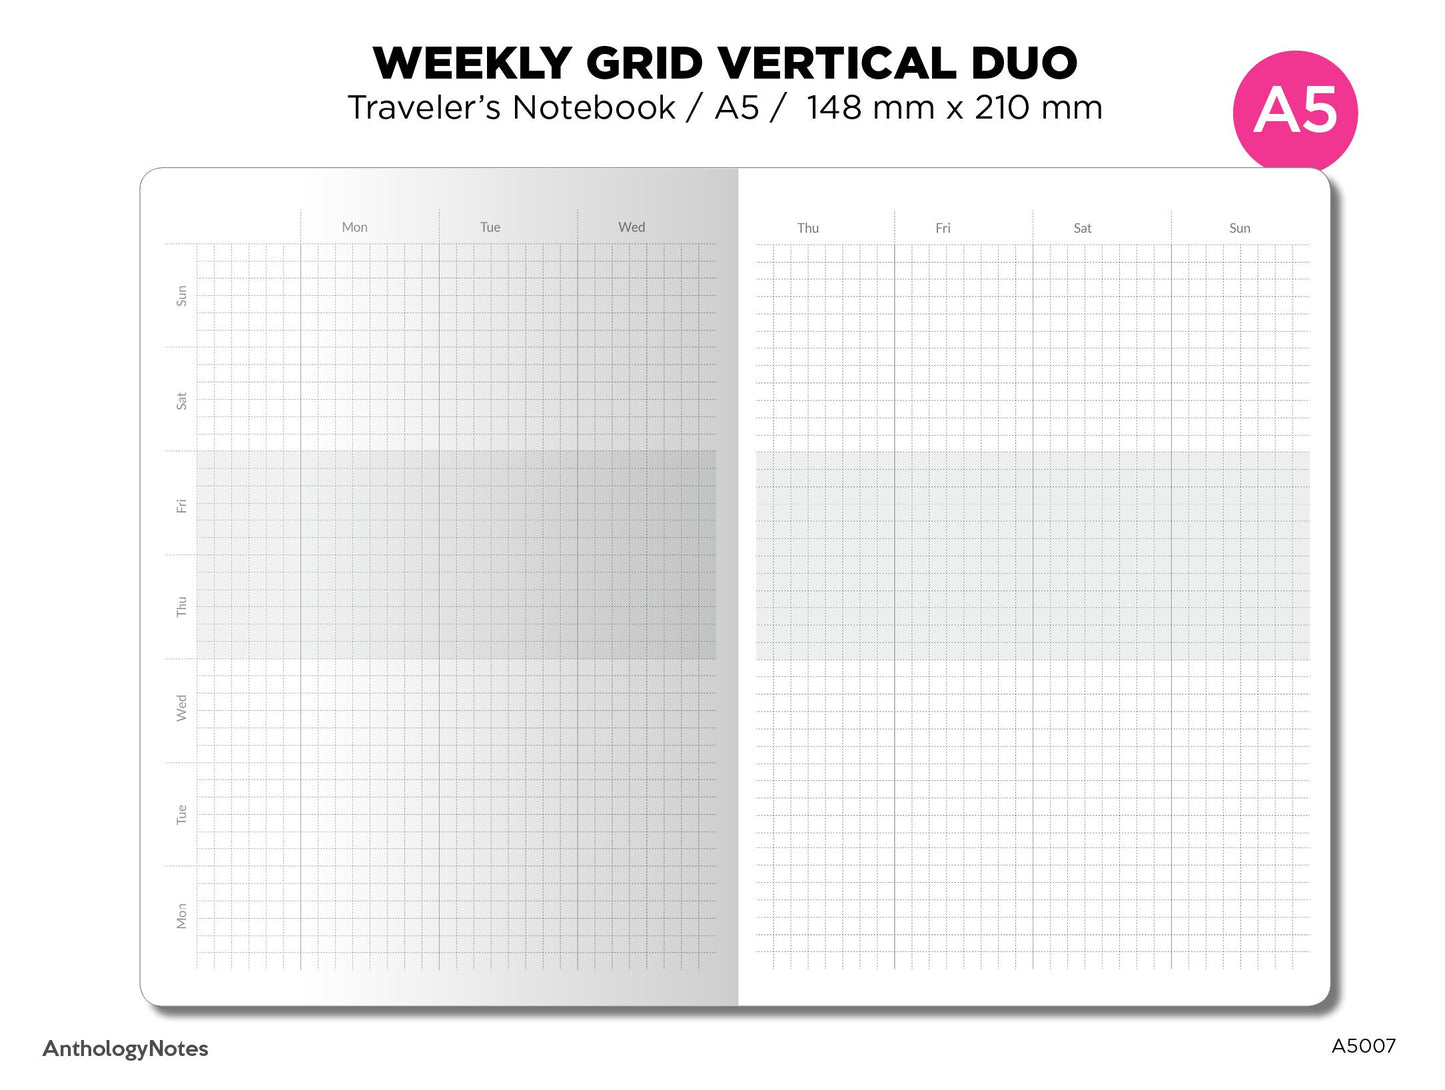 A5 Weekly View GRID Dual Layout Printable Traveler's Notebook Undated A5007